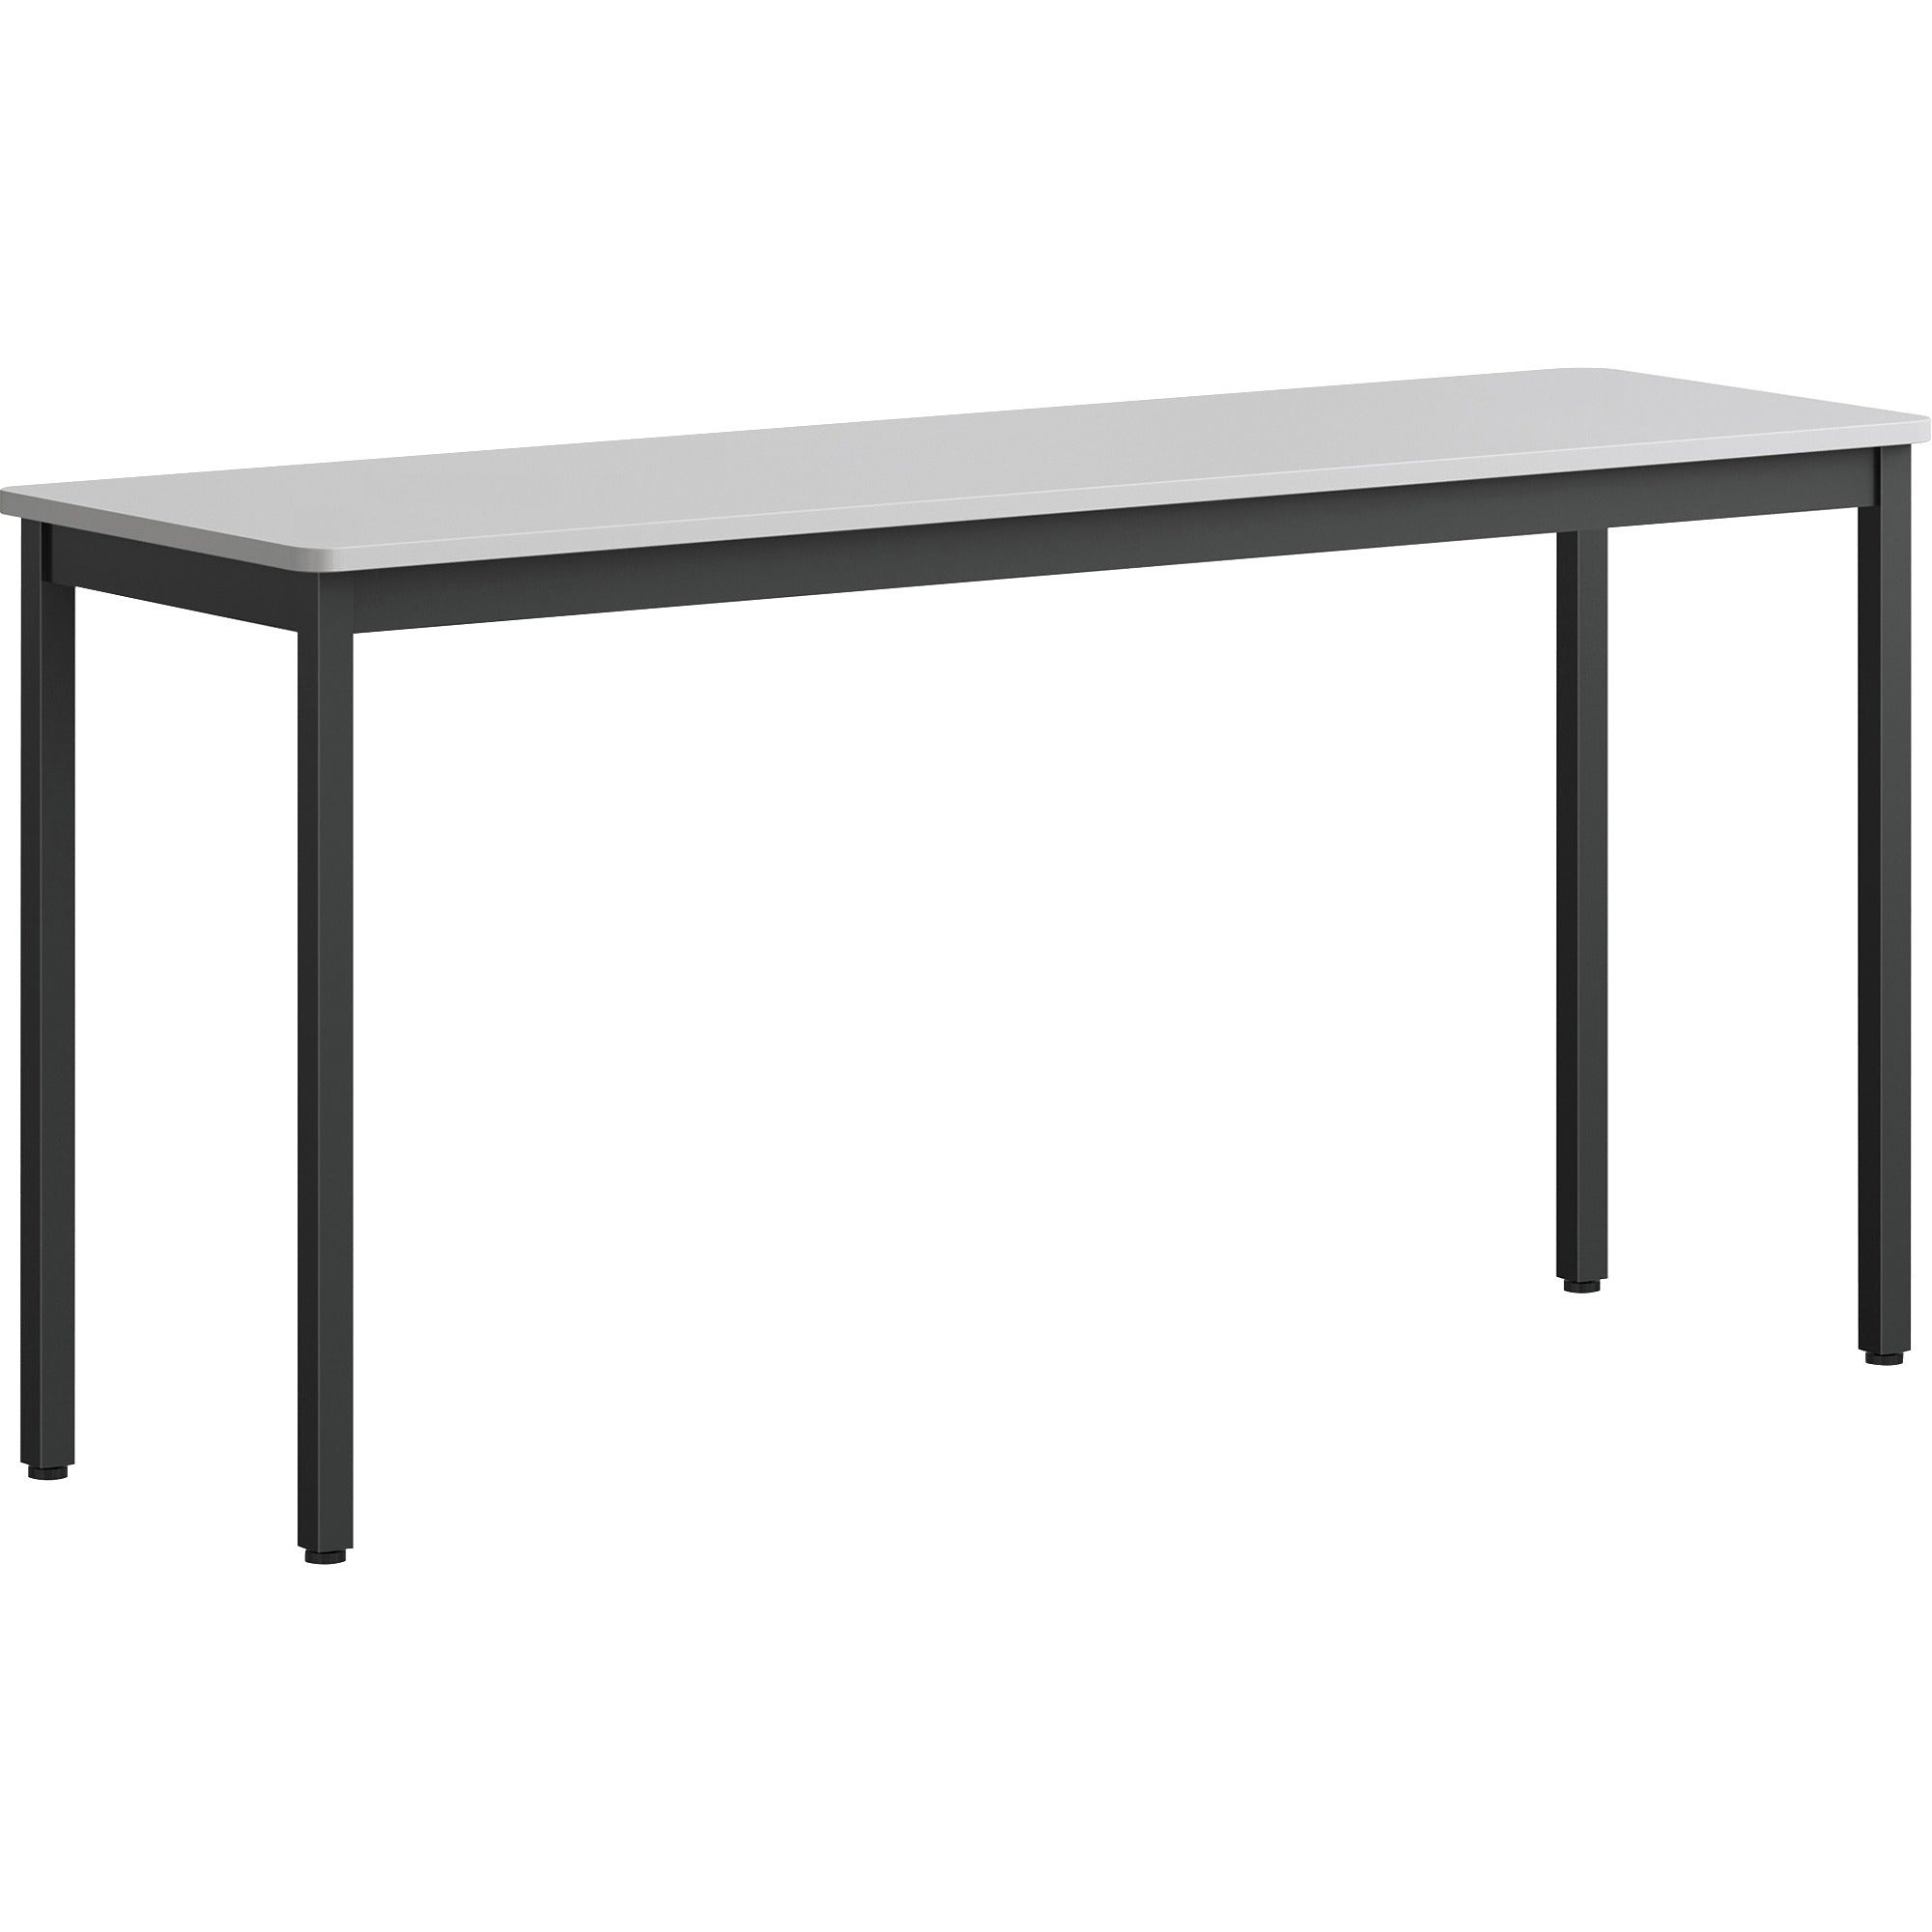 lorell-utility-table-for-table-topgray-rectangle-laminated-top-powder-coated-black-base-500-lb-capacity-x-5988-table-top-width-x-1813-table-top-depth-30-height-assembly-required-melamine-top-material-1-each_llr60754 - 1